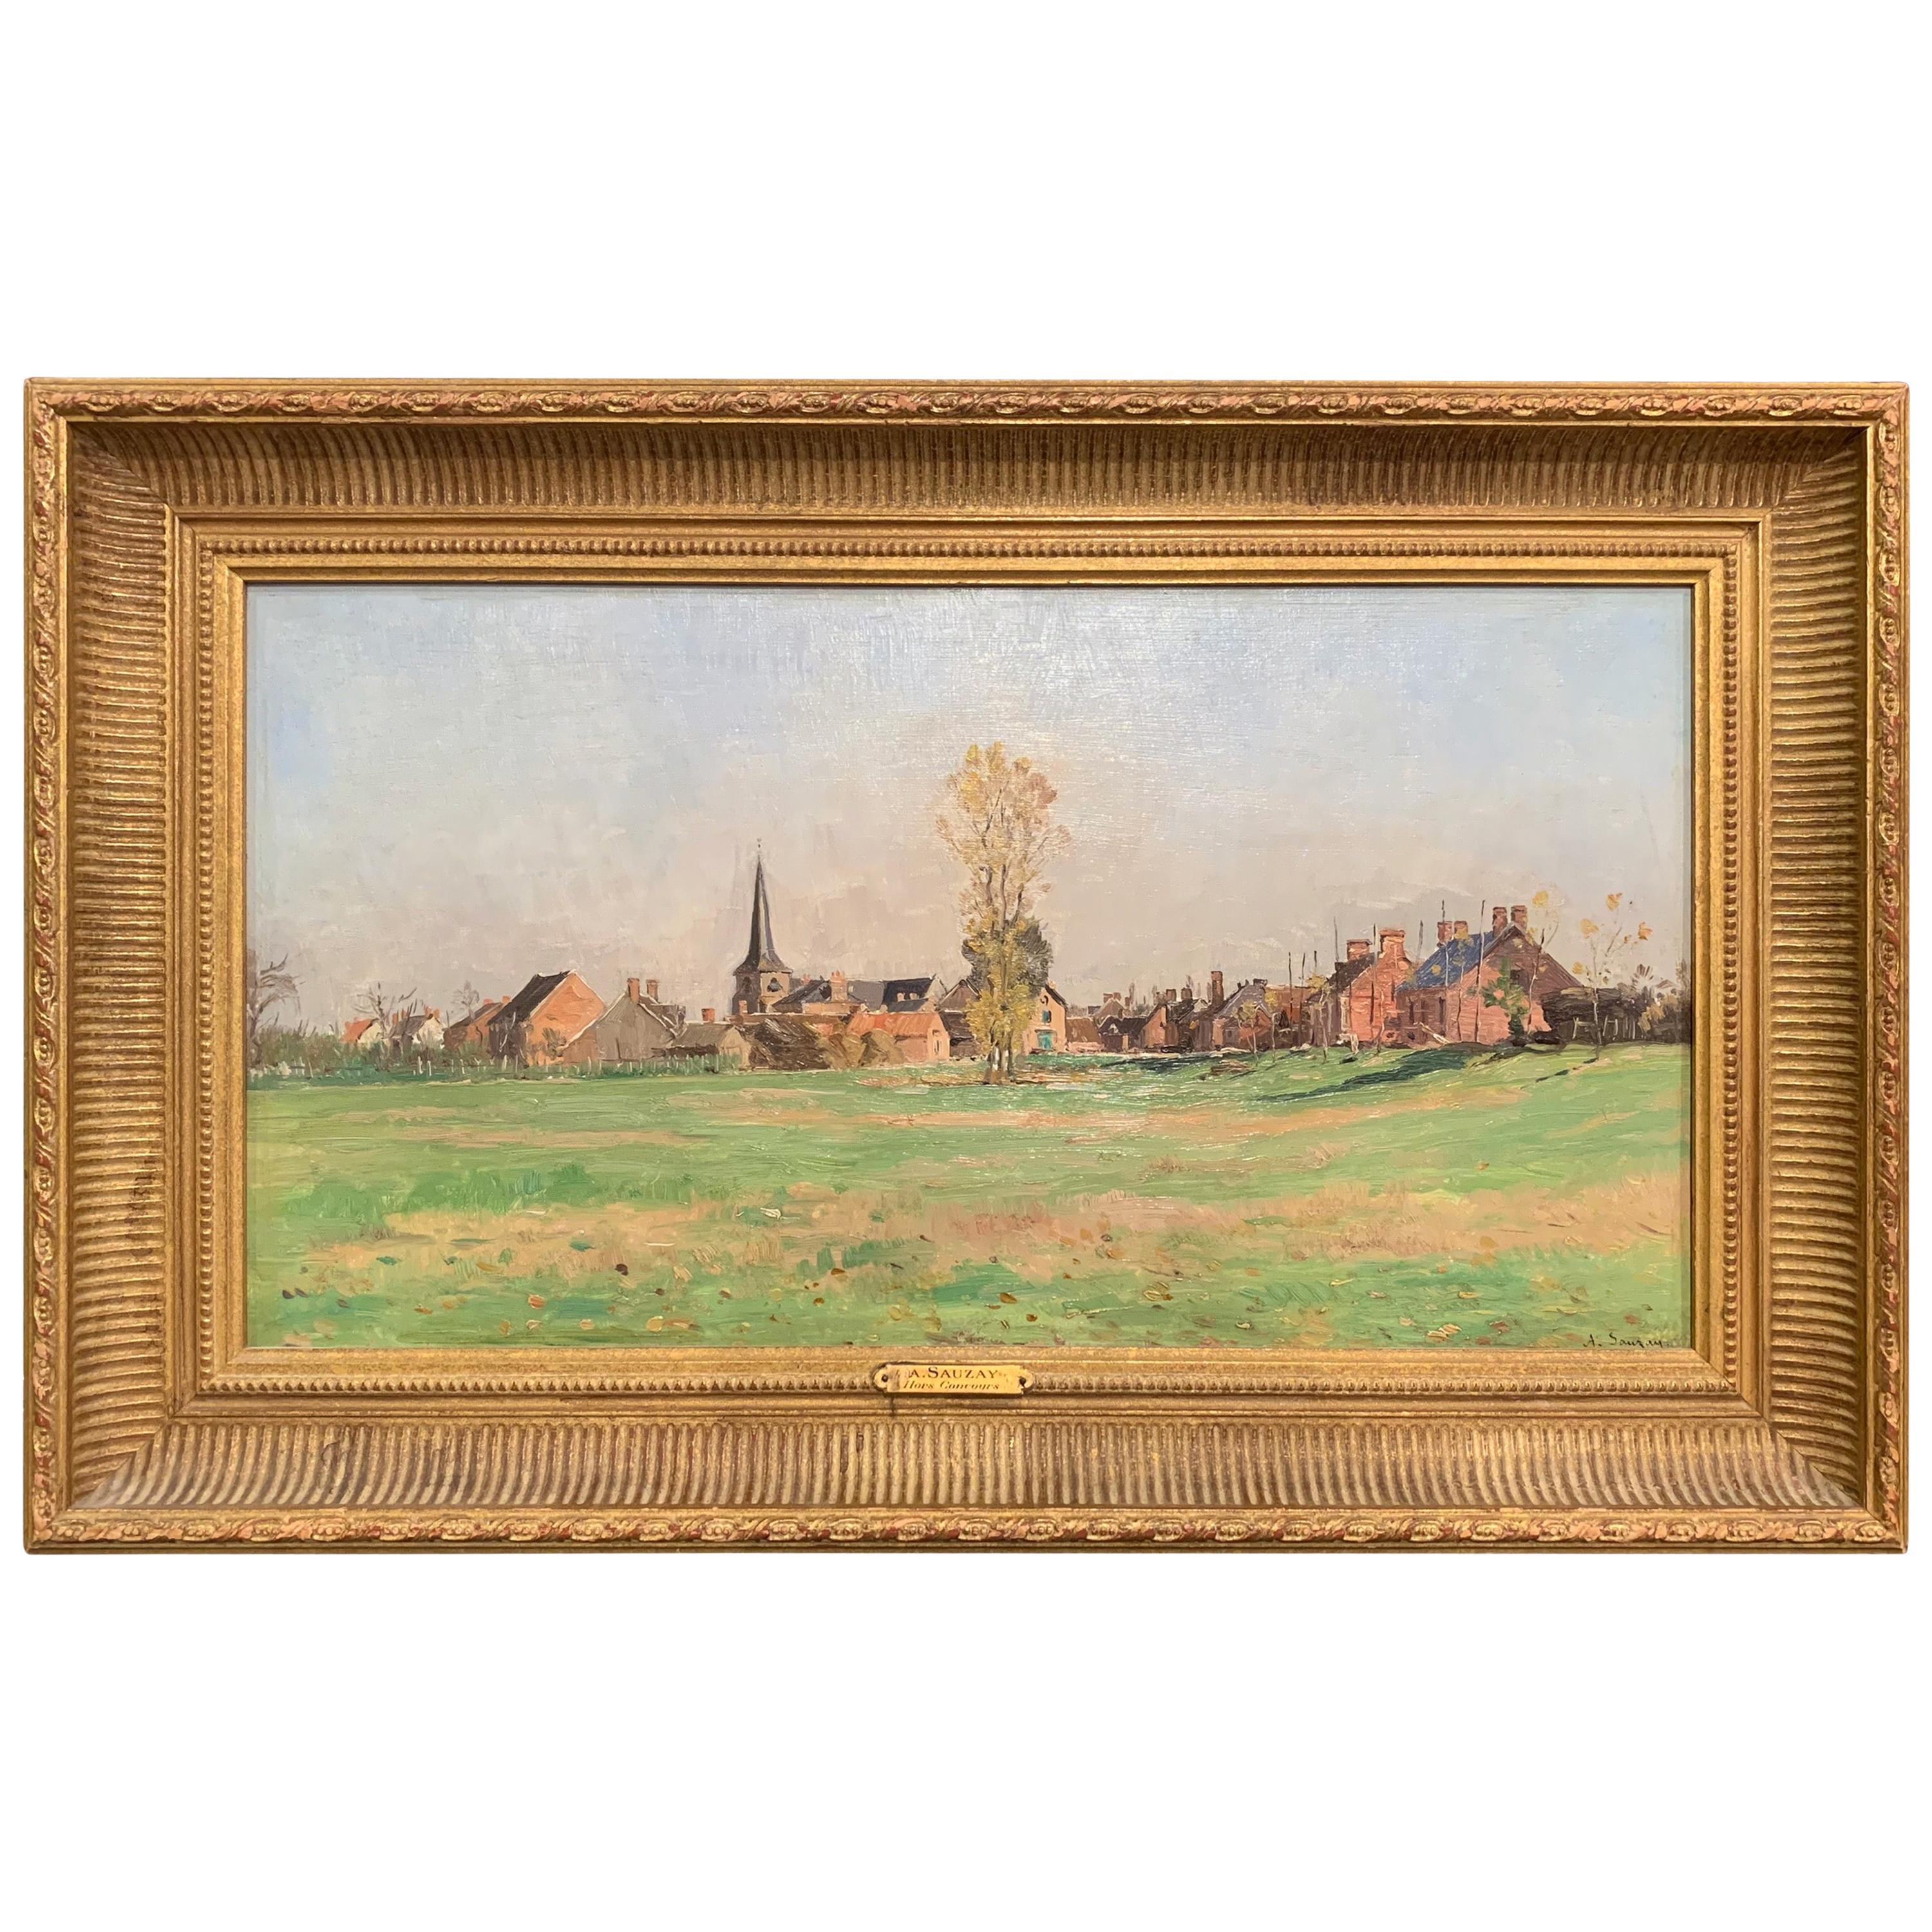 19th Century Oil on Board Landscape Painting in Gilt Frame Signed A. Sauzay